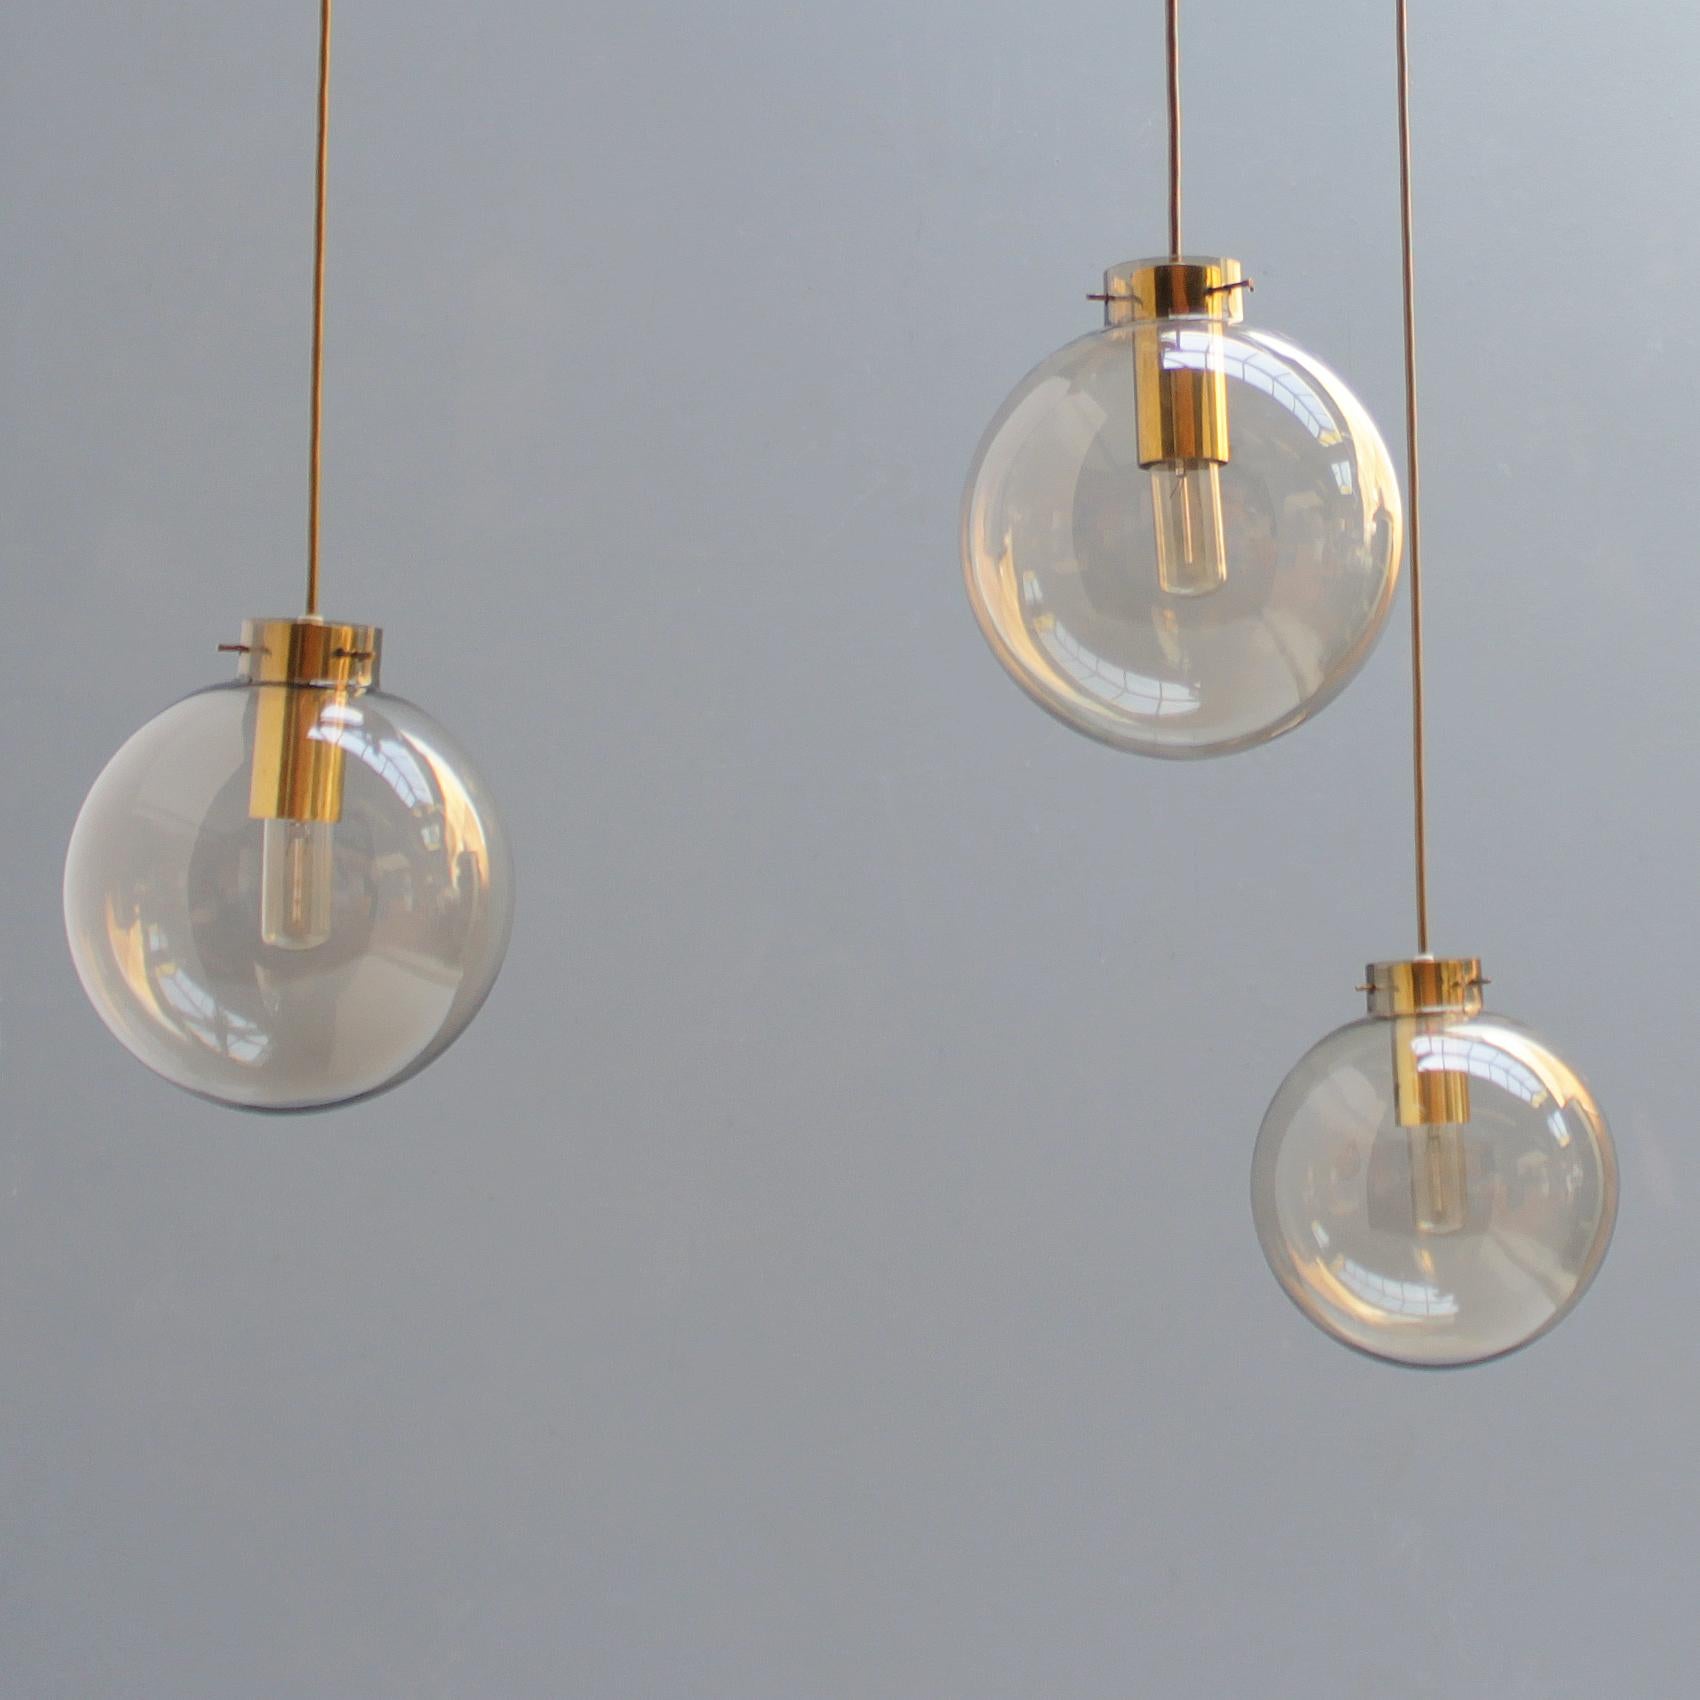 Fixture with three smoke glass spheres. Brass ceiling plate with three cable guides. You can make your own configuration by distributing the three guides across the ceiling. The length of the cable is also adjustable. Beautifully crafted details and